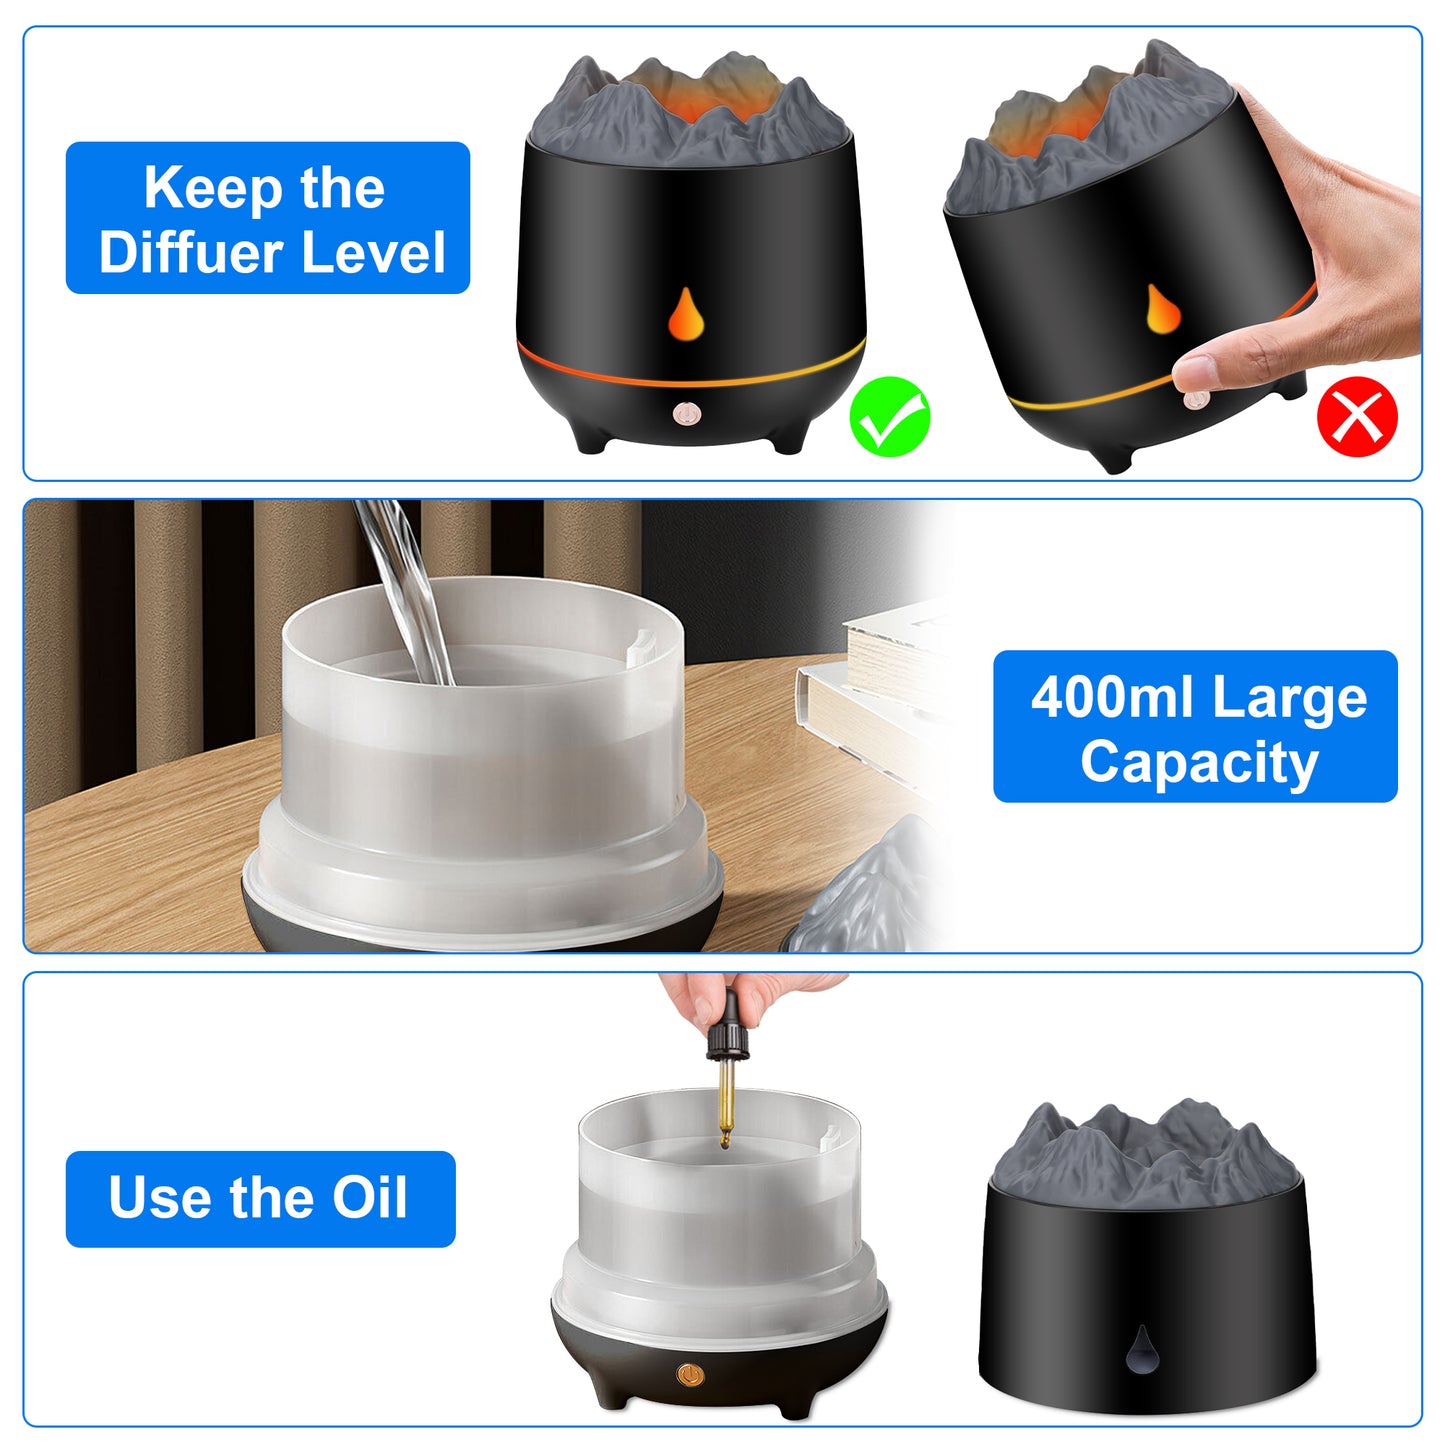 Simulated Volcano Aromatherapy Diffuser- Quiet Cool Mist for Bedroom & Office, Auto Shut Off - Enhance Air Quality with Aromatherapy Oil Diffuser - Perfect Gift & Night Light